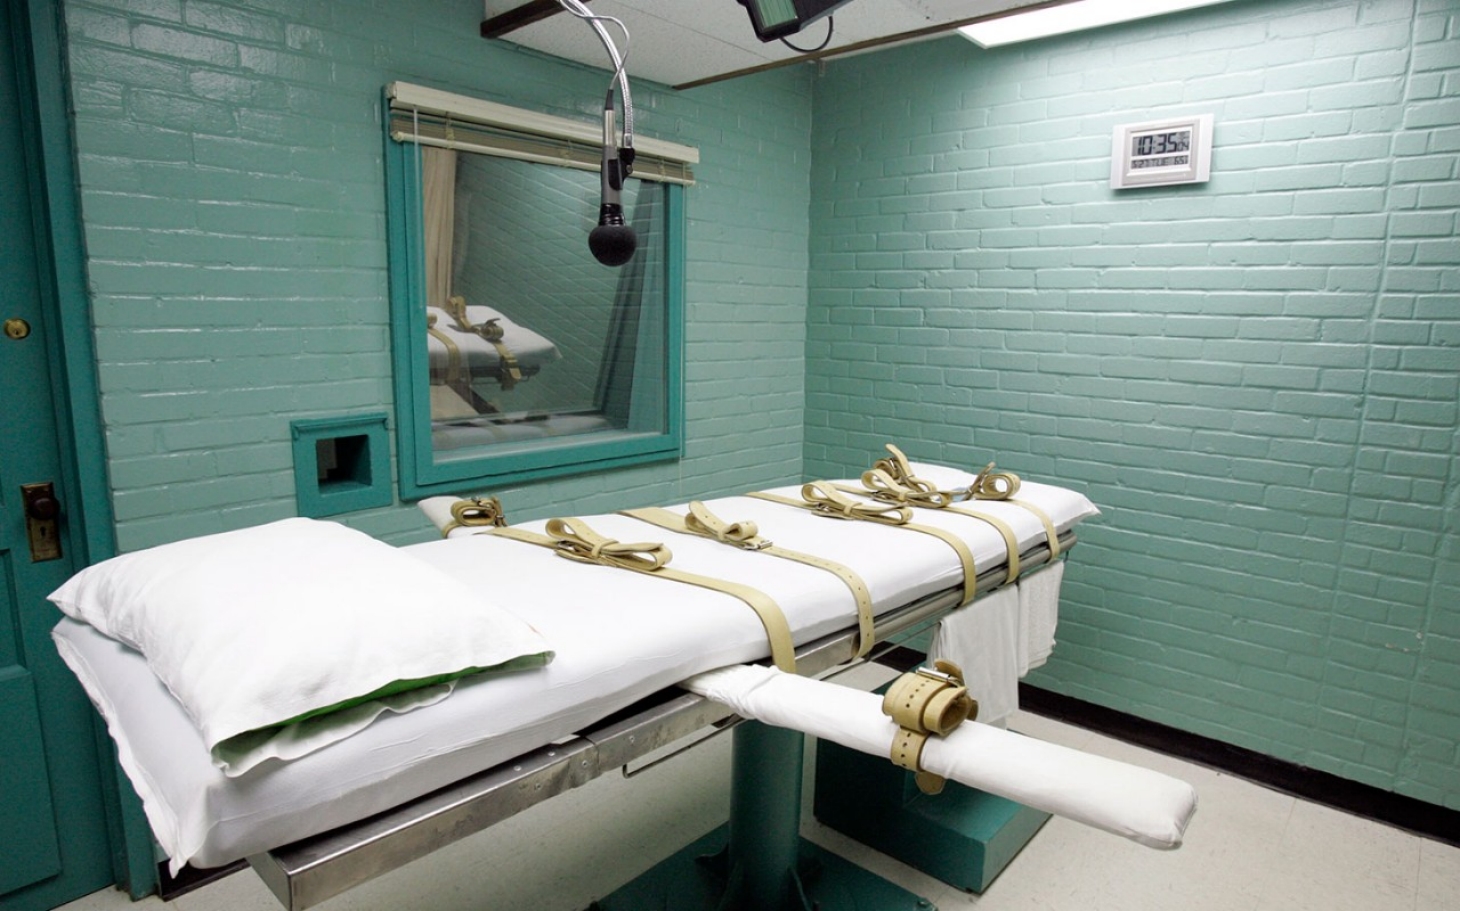 Ohio says it is prepared to resume executing their condemned on death row with a new three-drug cocktail.